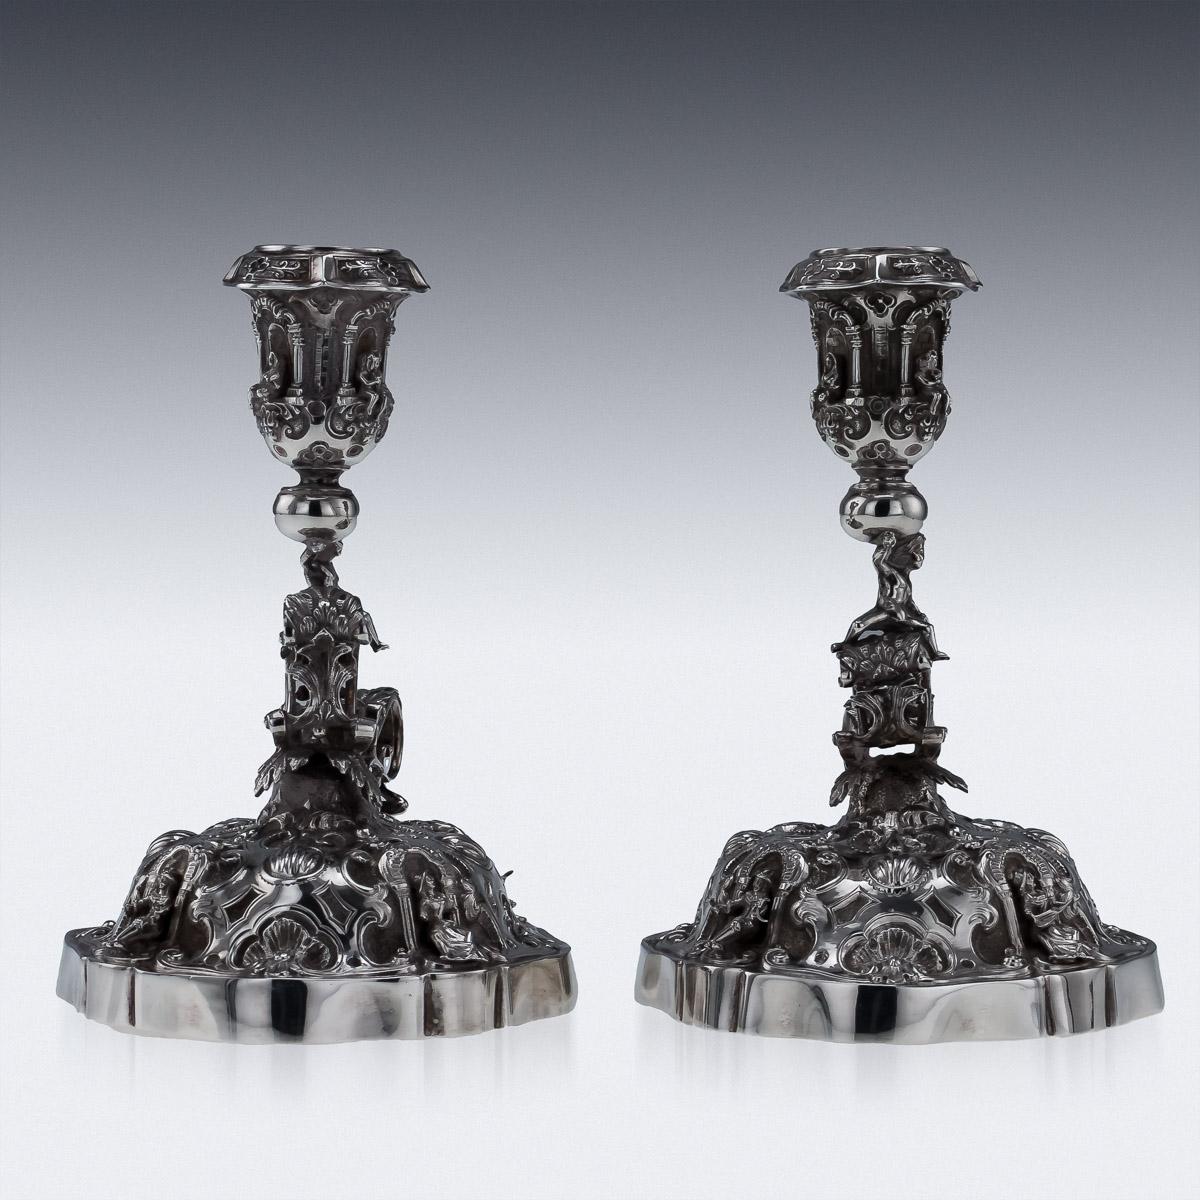 20th Century Antique German Pair of Solid Silver Figural Chambersticks, circa 1900